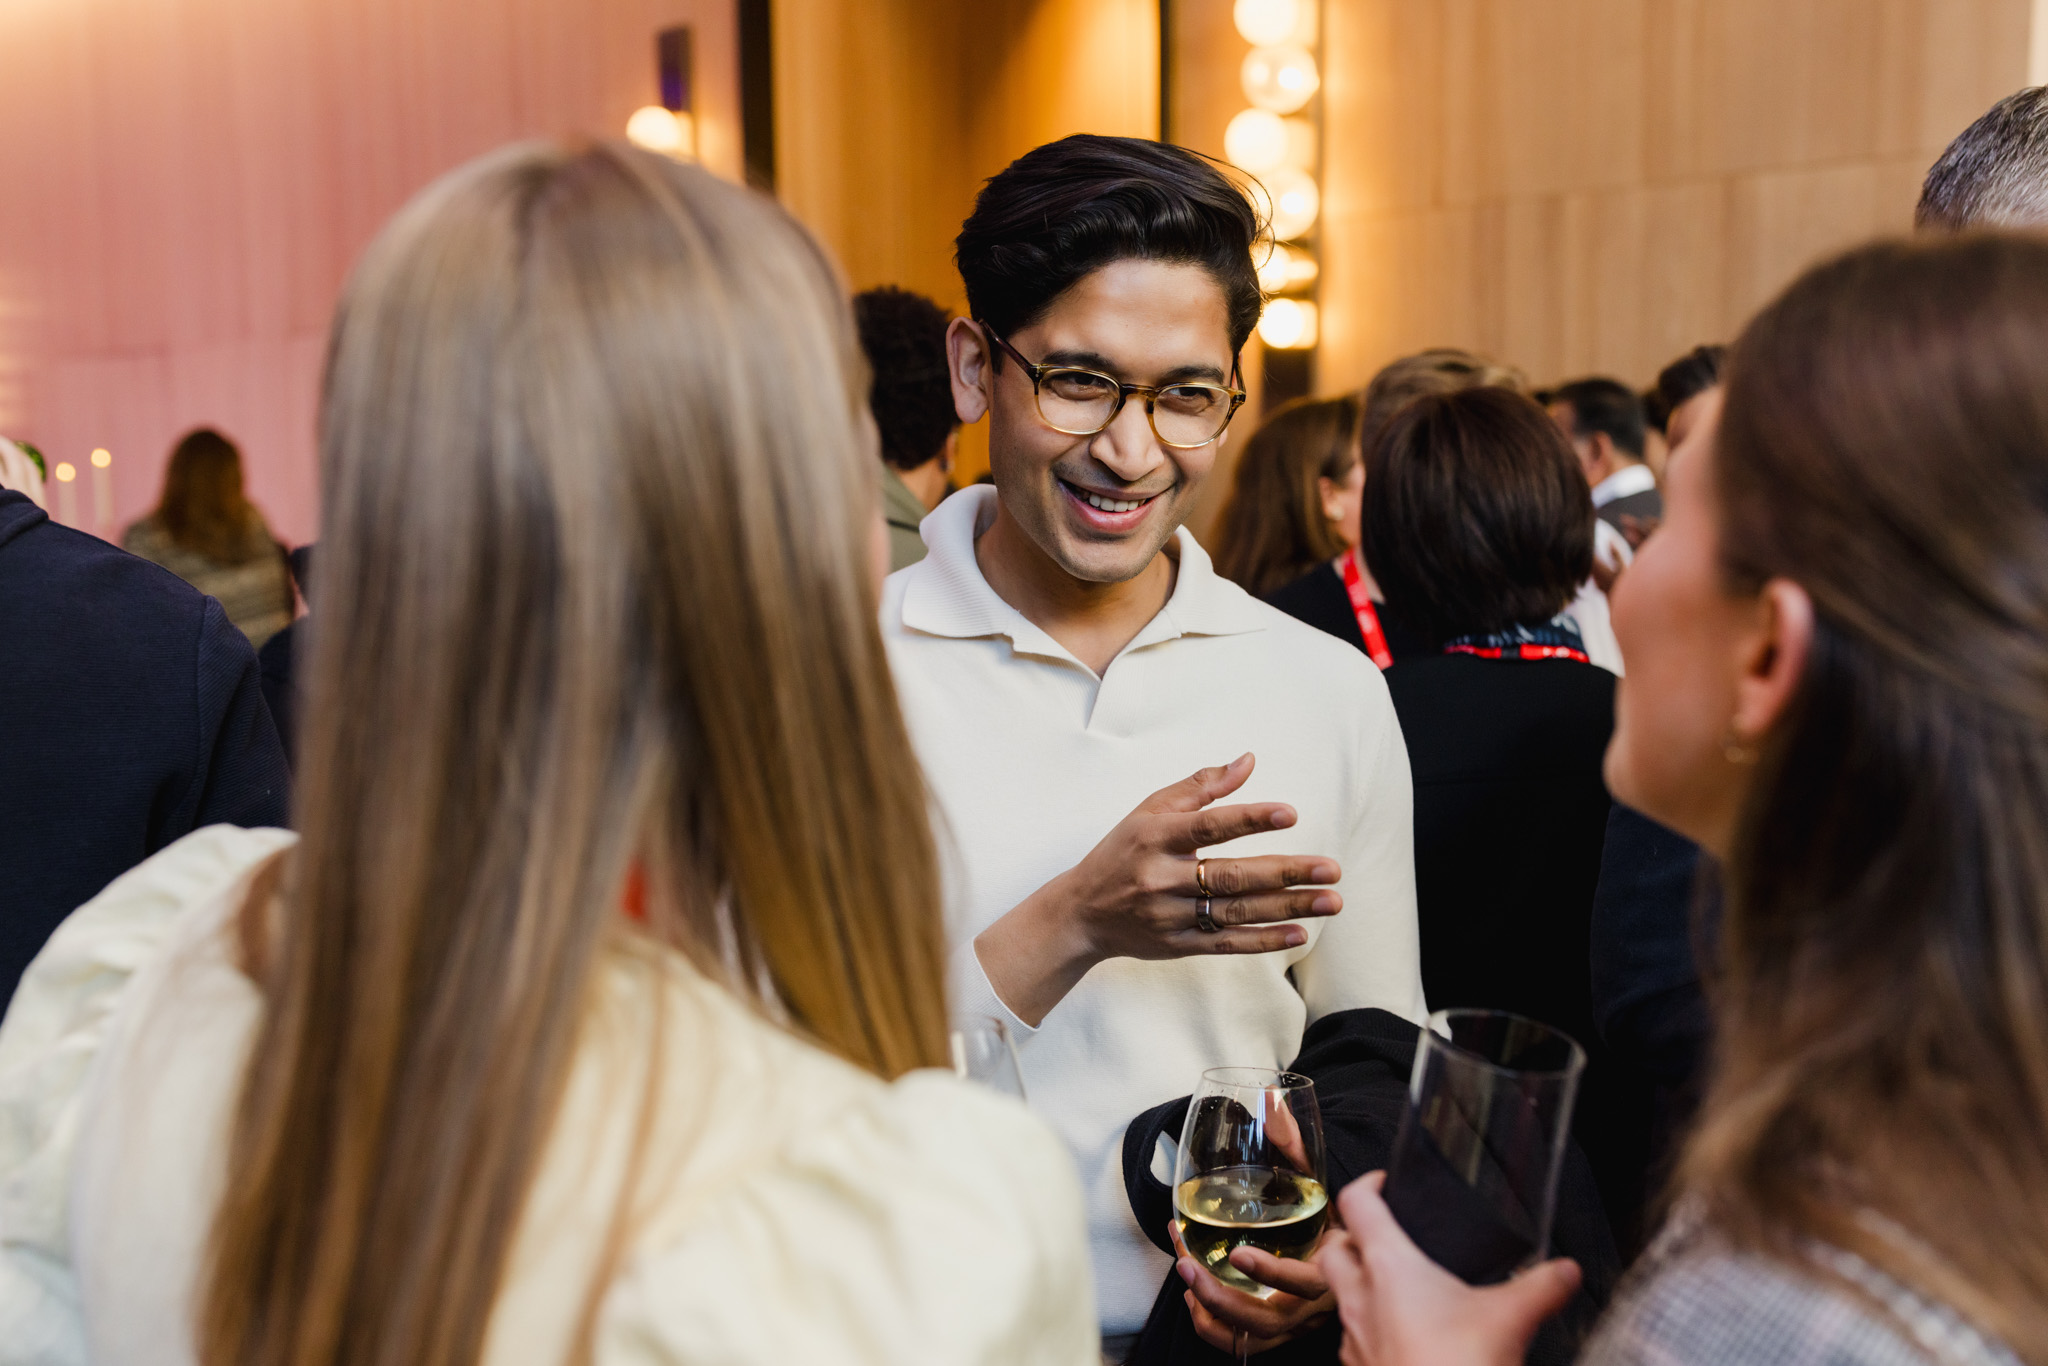 A person is smiling and conversing with two others at a social event. They are holding drinks and appear to be enjoying the conversation in a warmly lit room, perfectly captured through corporate photography.